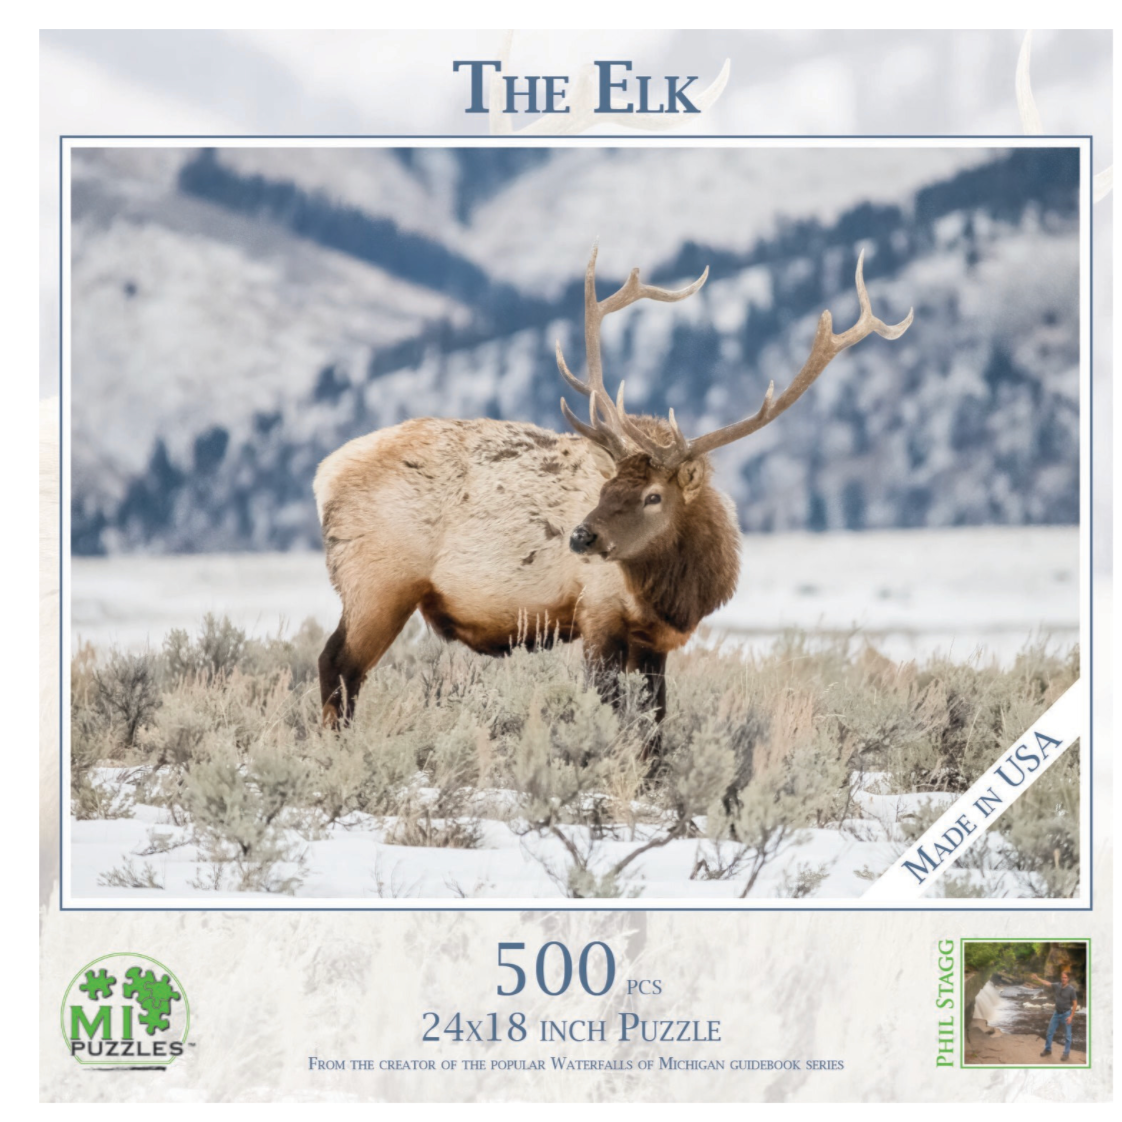 The Elk 500 pc Jigsaw Puzzle